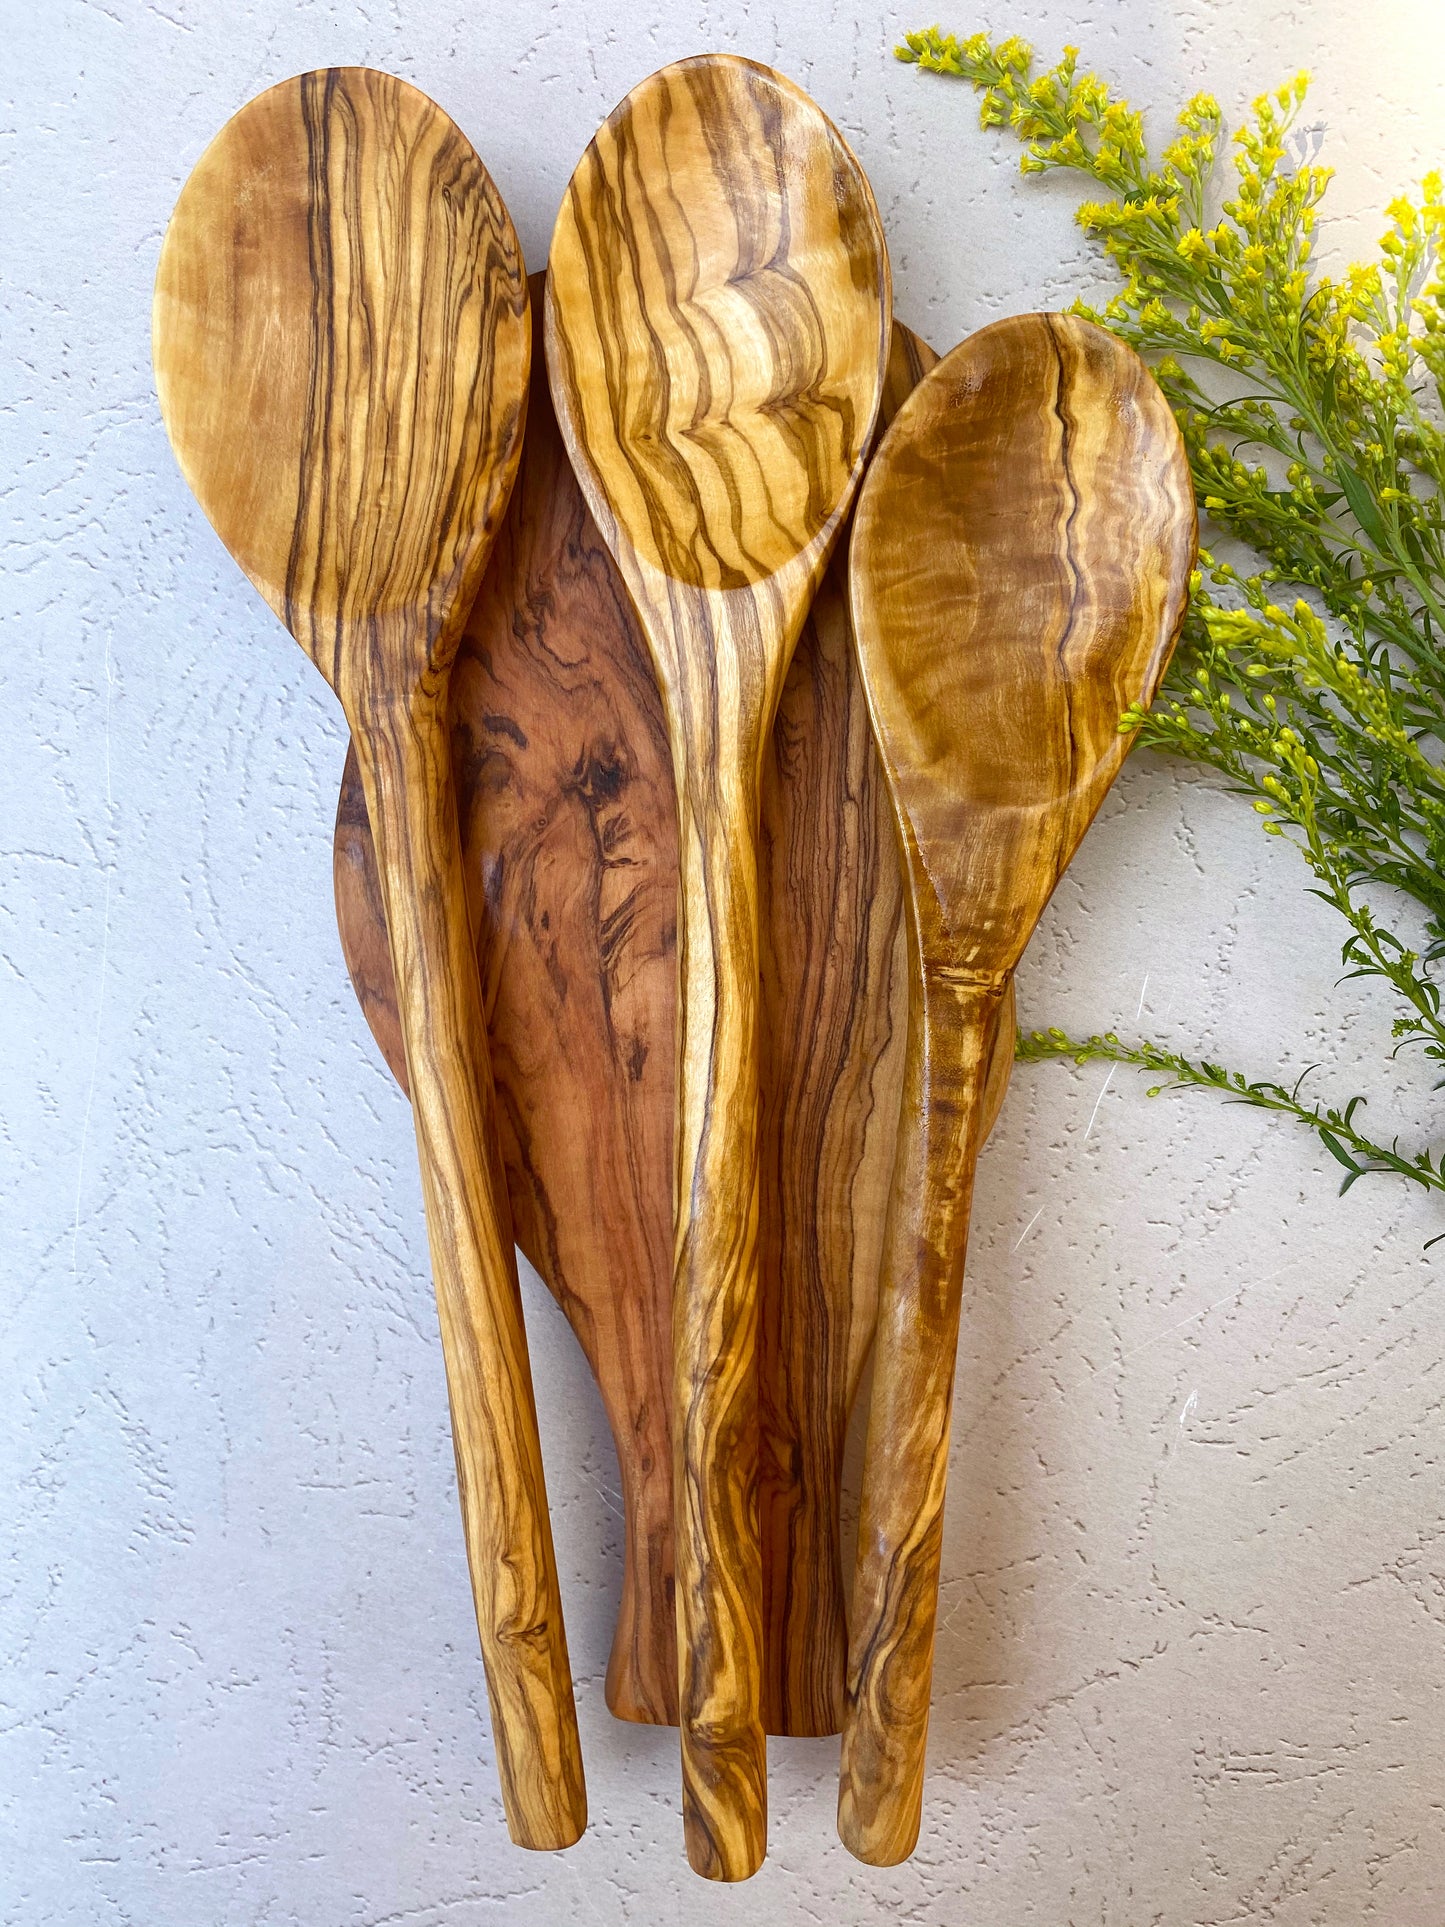 XL Everyday Olive Wood Spoon//12 inch